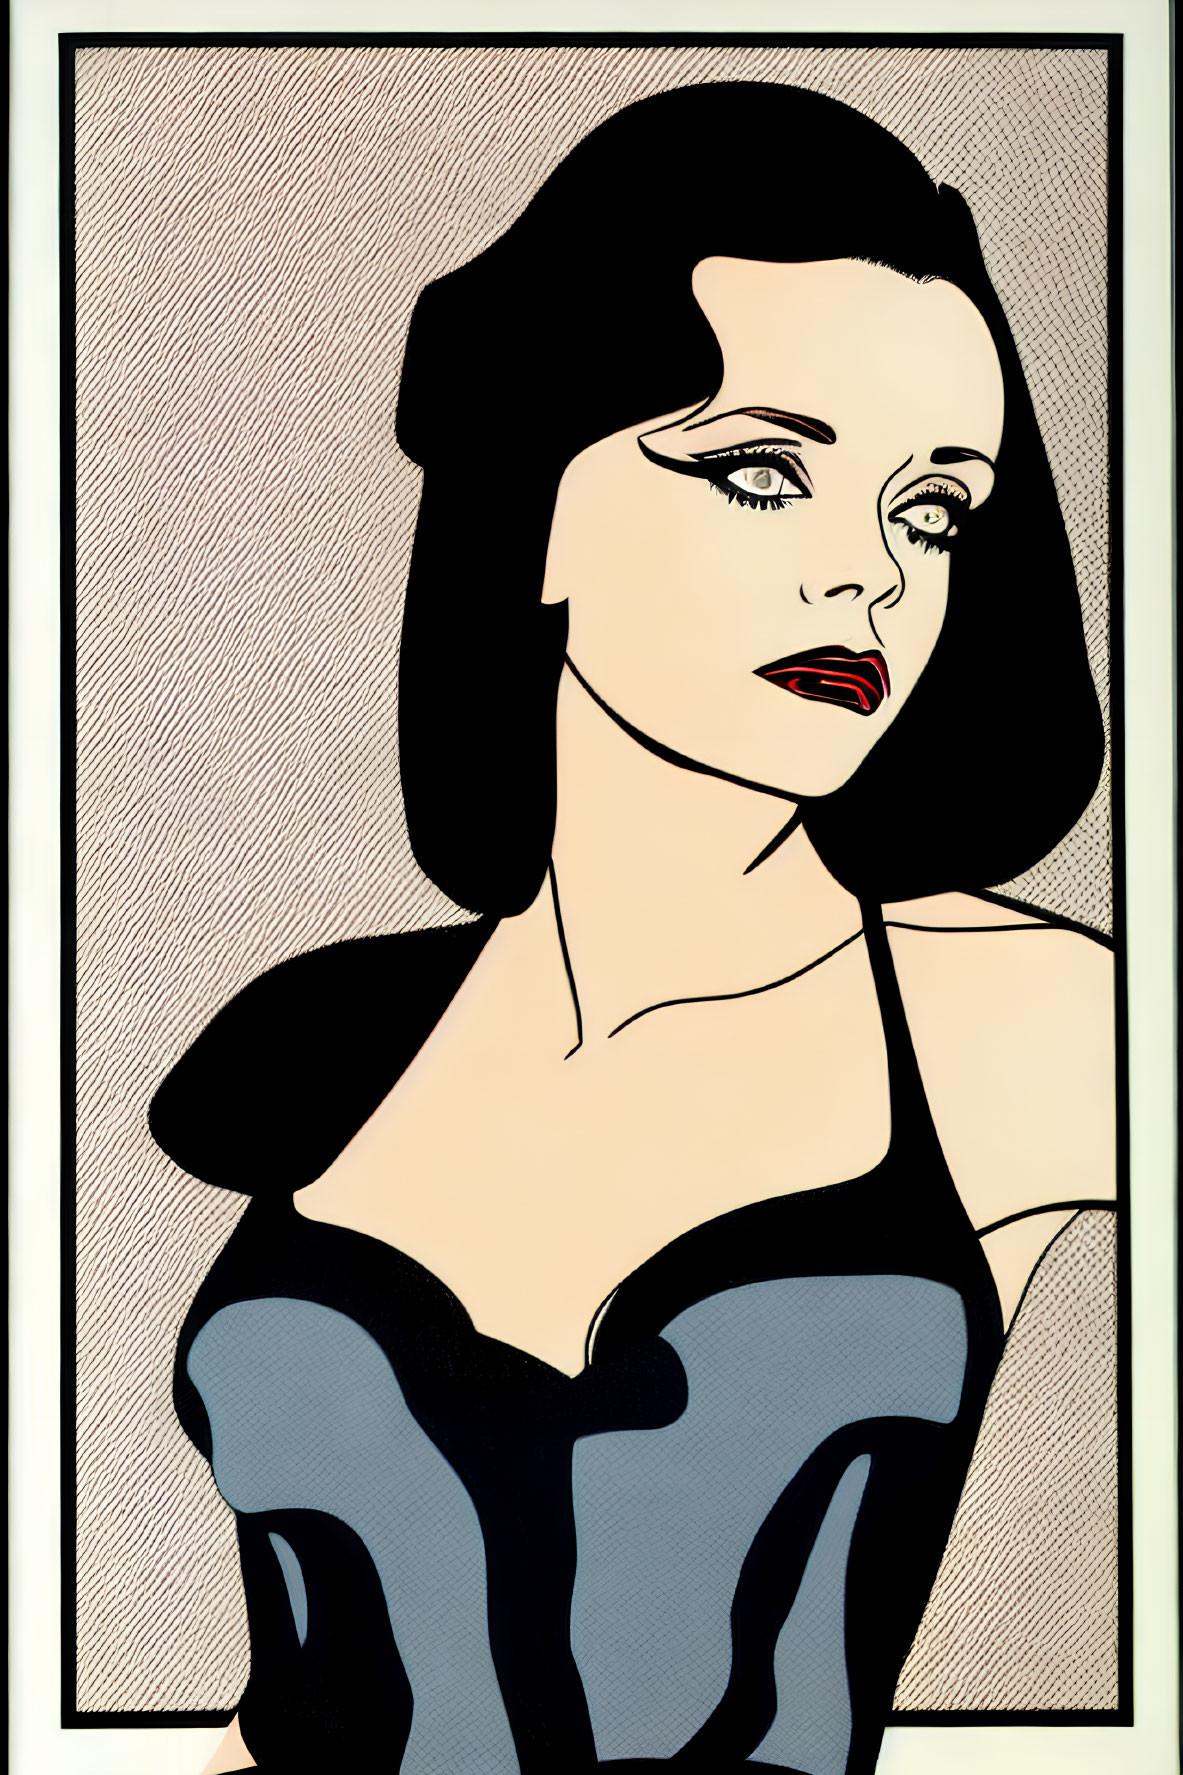 Pop Art Style Illustration of Woman with Dark Hair and Red Lips